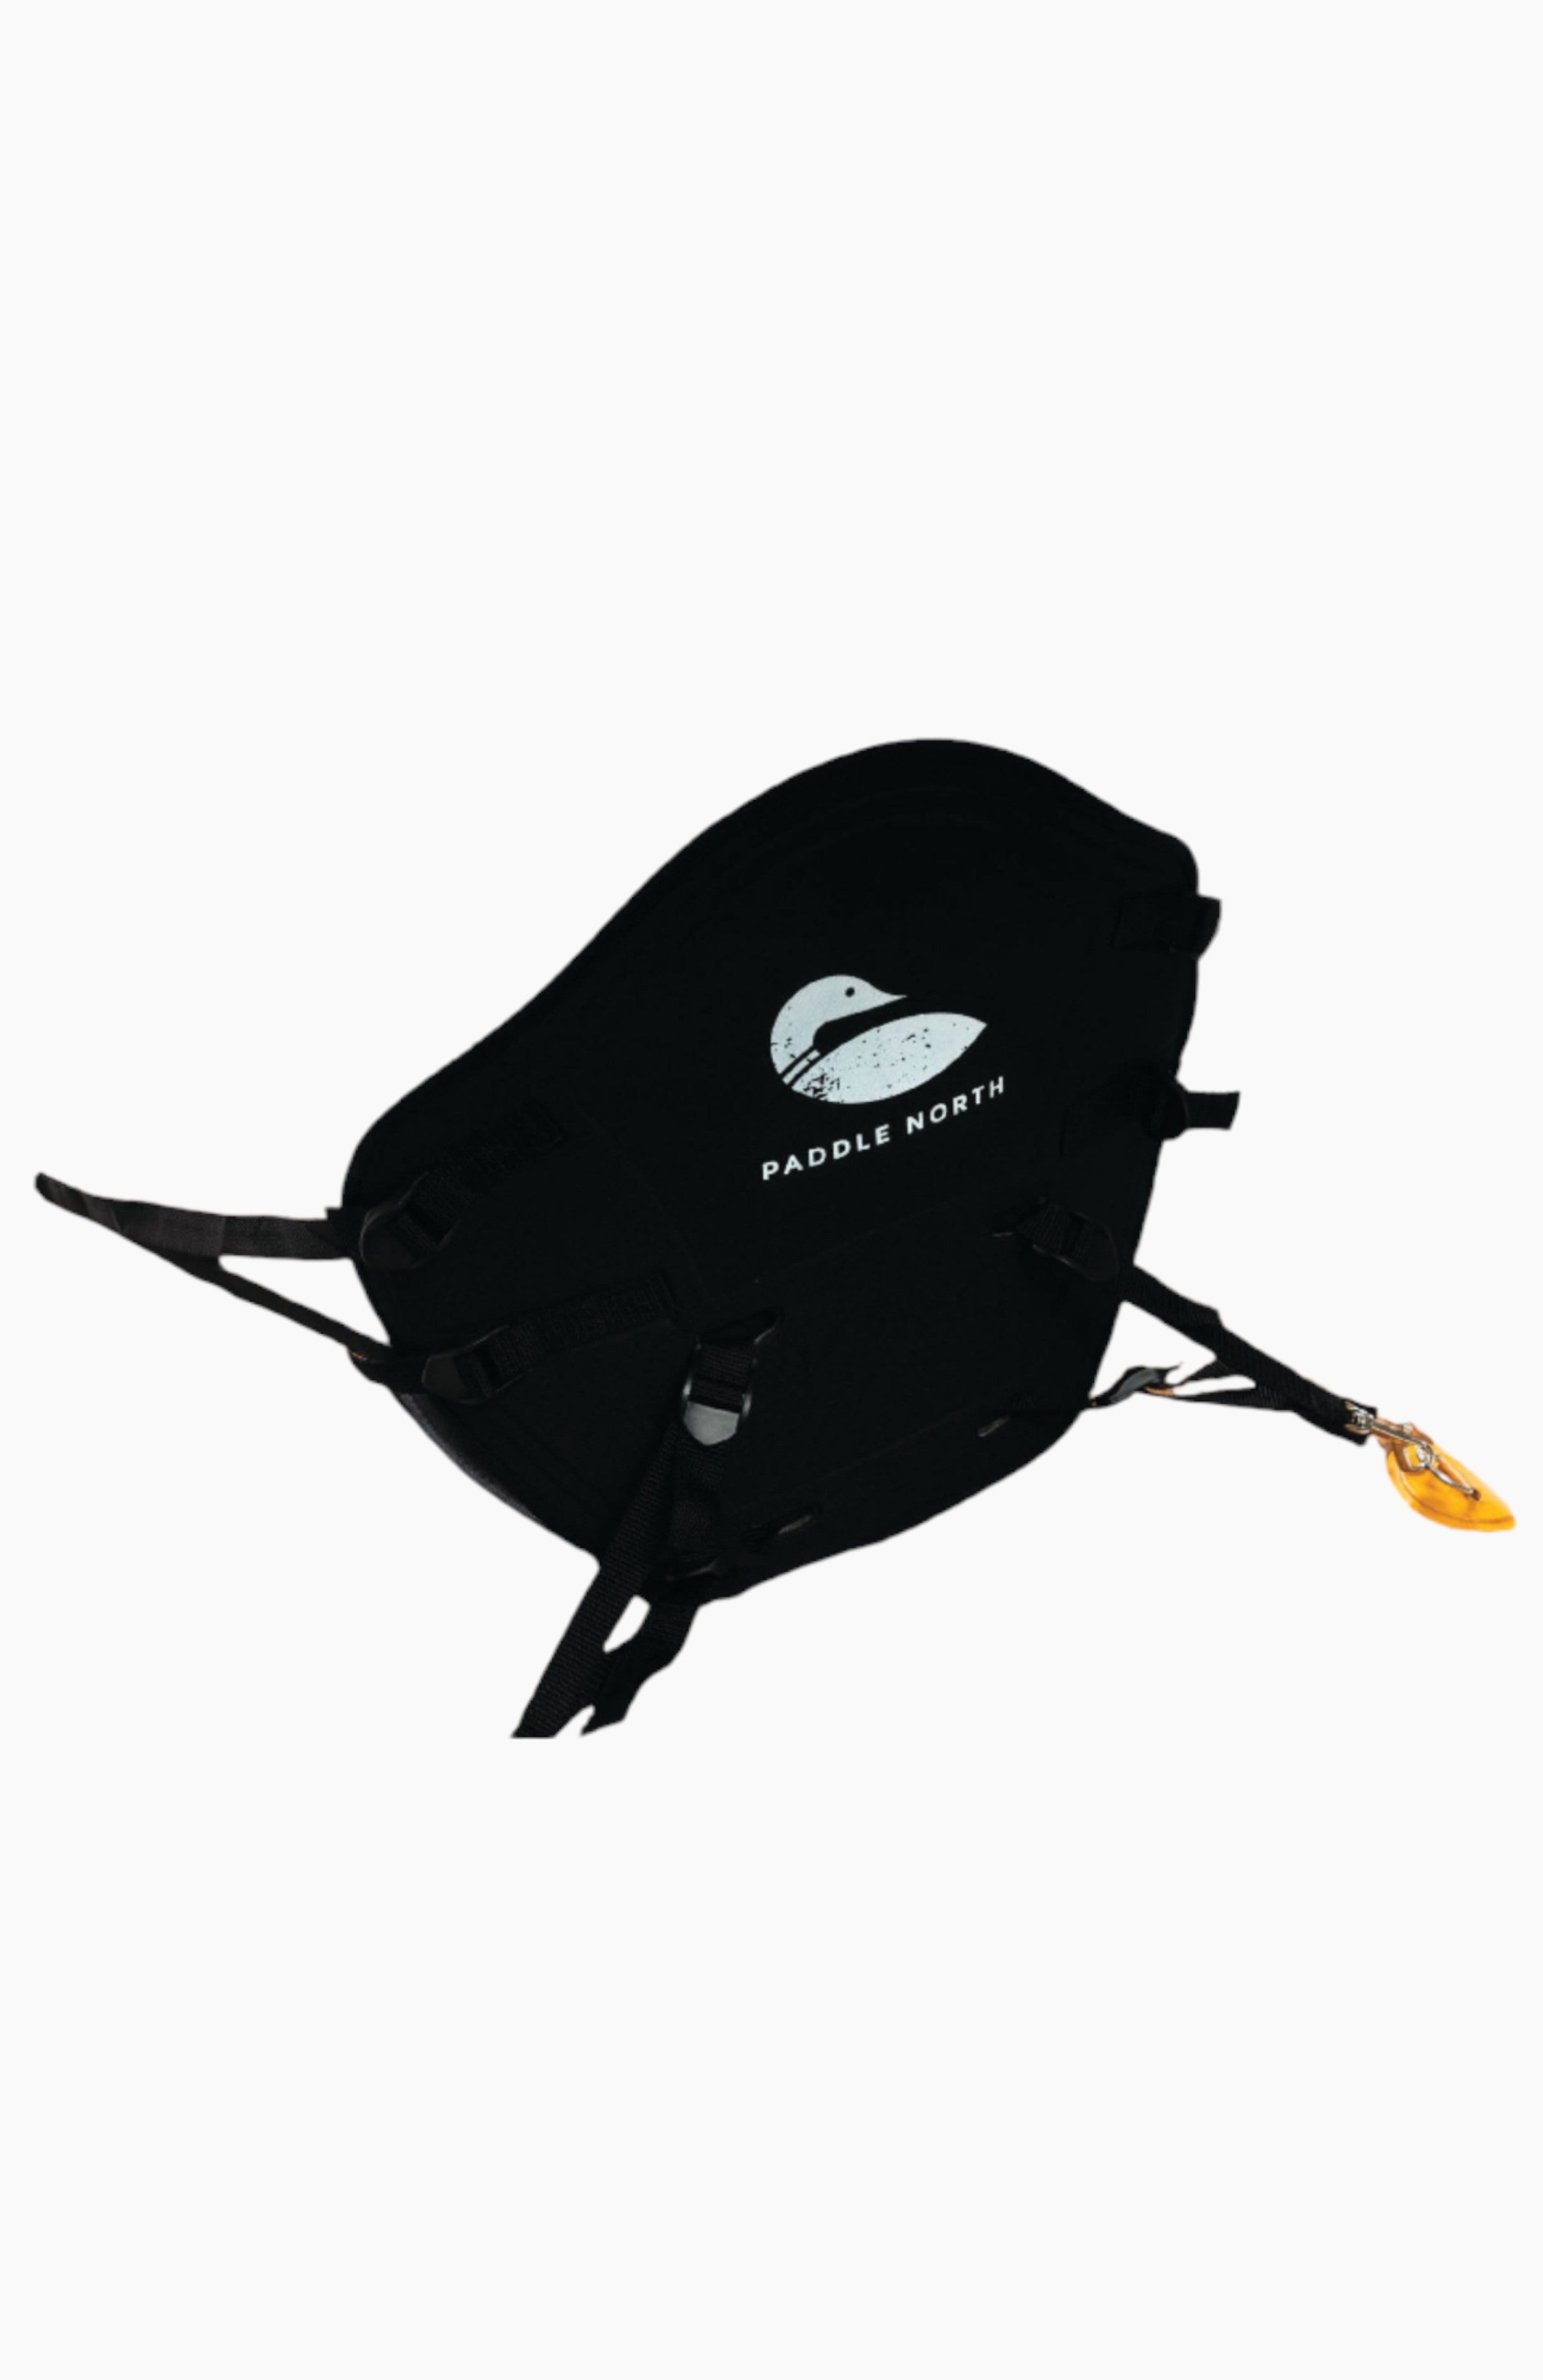 Kayak accessories: a black removable seat that sits on top of a paddle north kayak.